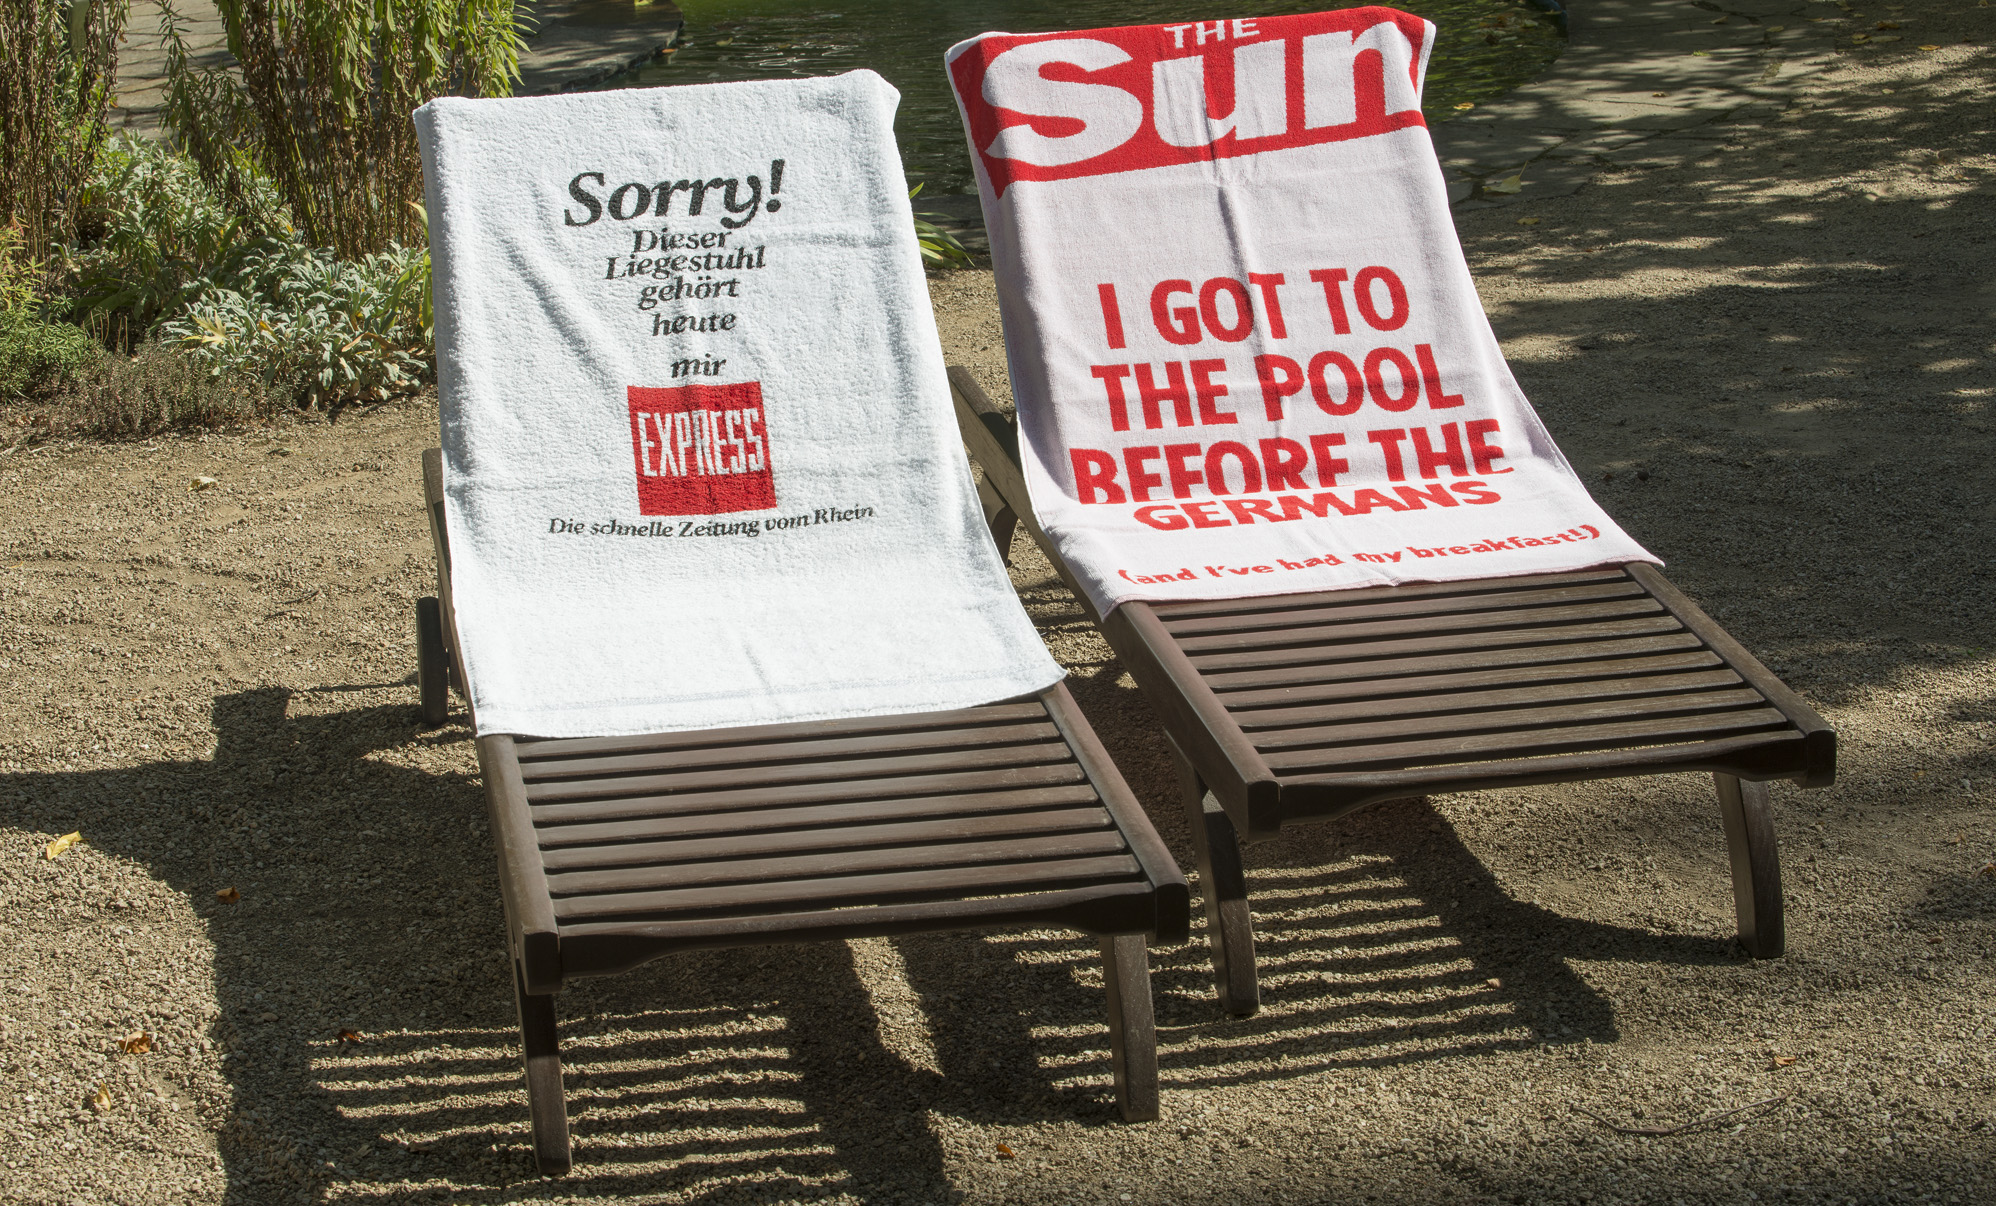  Two deck chairs with towels, one by the German newspaper Express, "Sorry, dieser Liegestuhl gehört heute mir!" and one by the british newspaper "The Sun", "I got to the pool before the Germans".